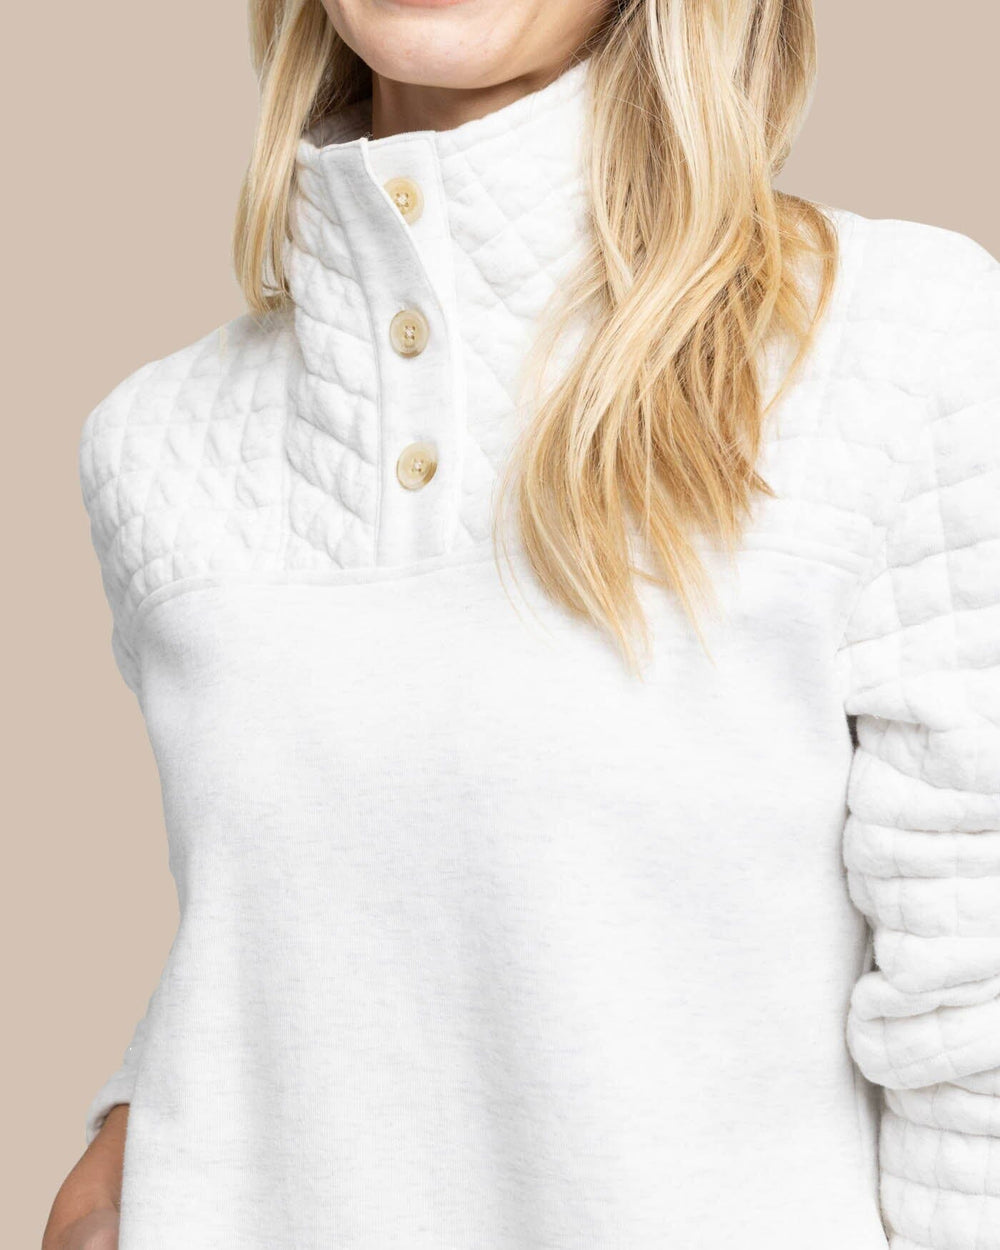 The detail view of the Southern Tide Kelsea Quilted Heather Pullover by Southern Tide - Heather Star White